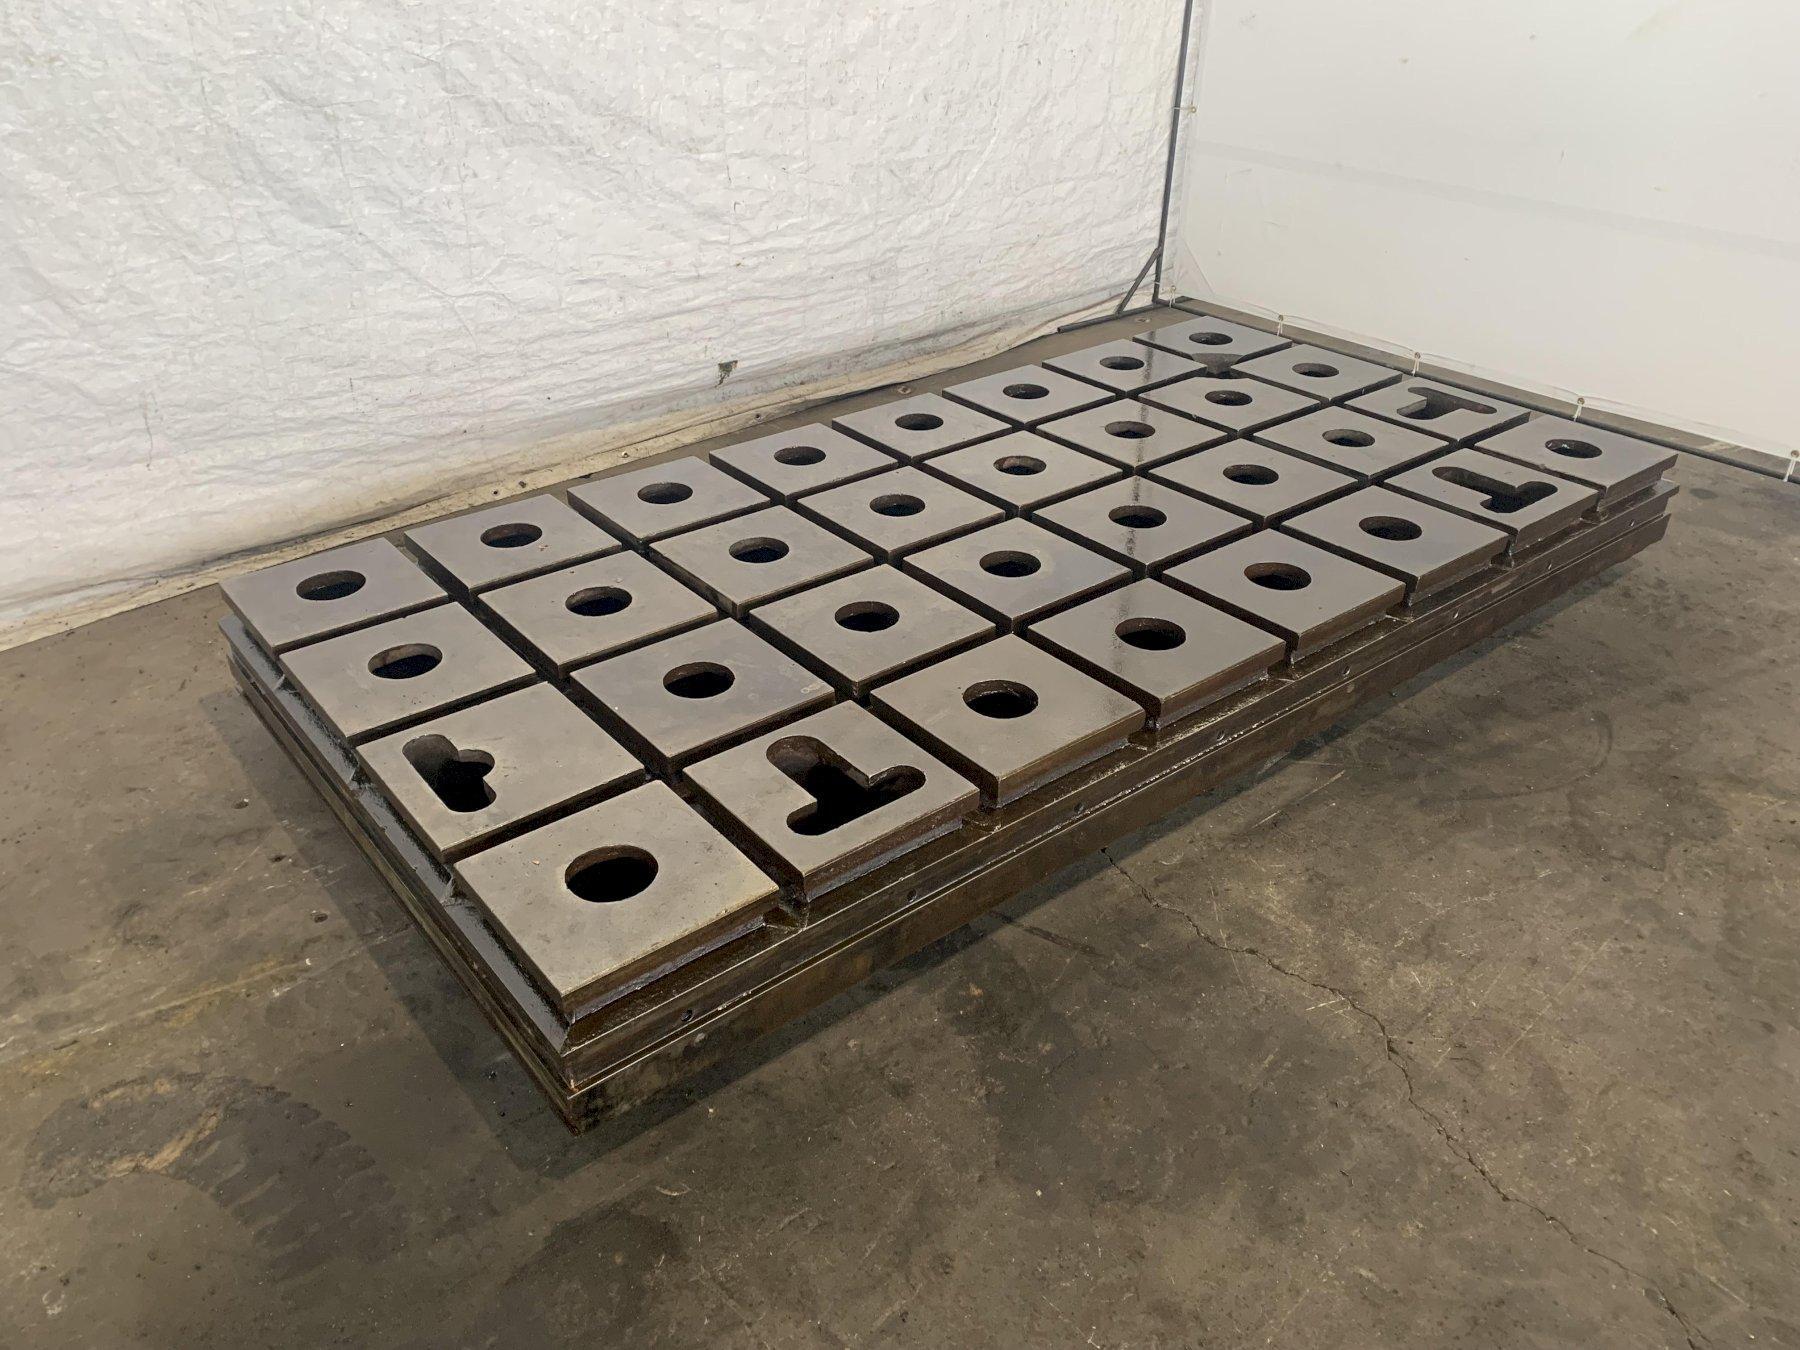 60" X 120" X 10" T-SLOTTED FLOOR PLATE. STOCK # 0416323